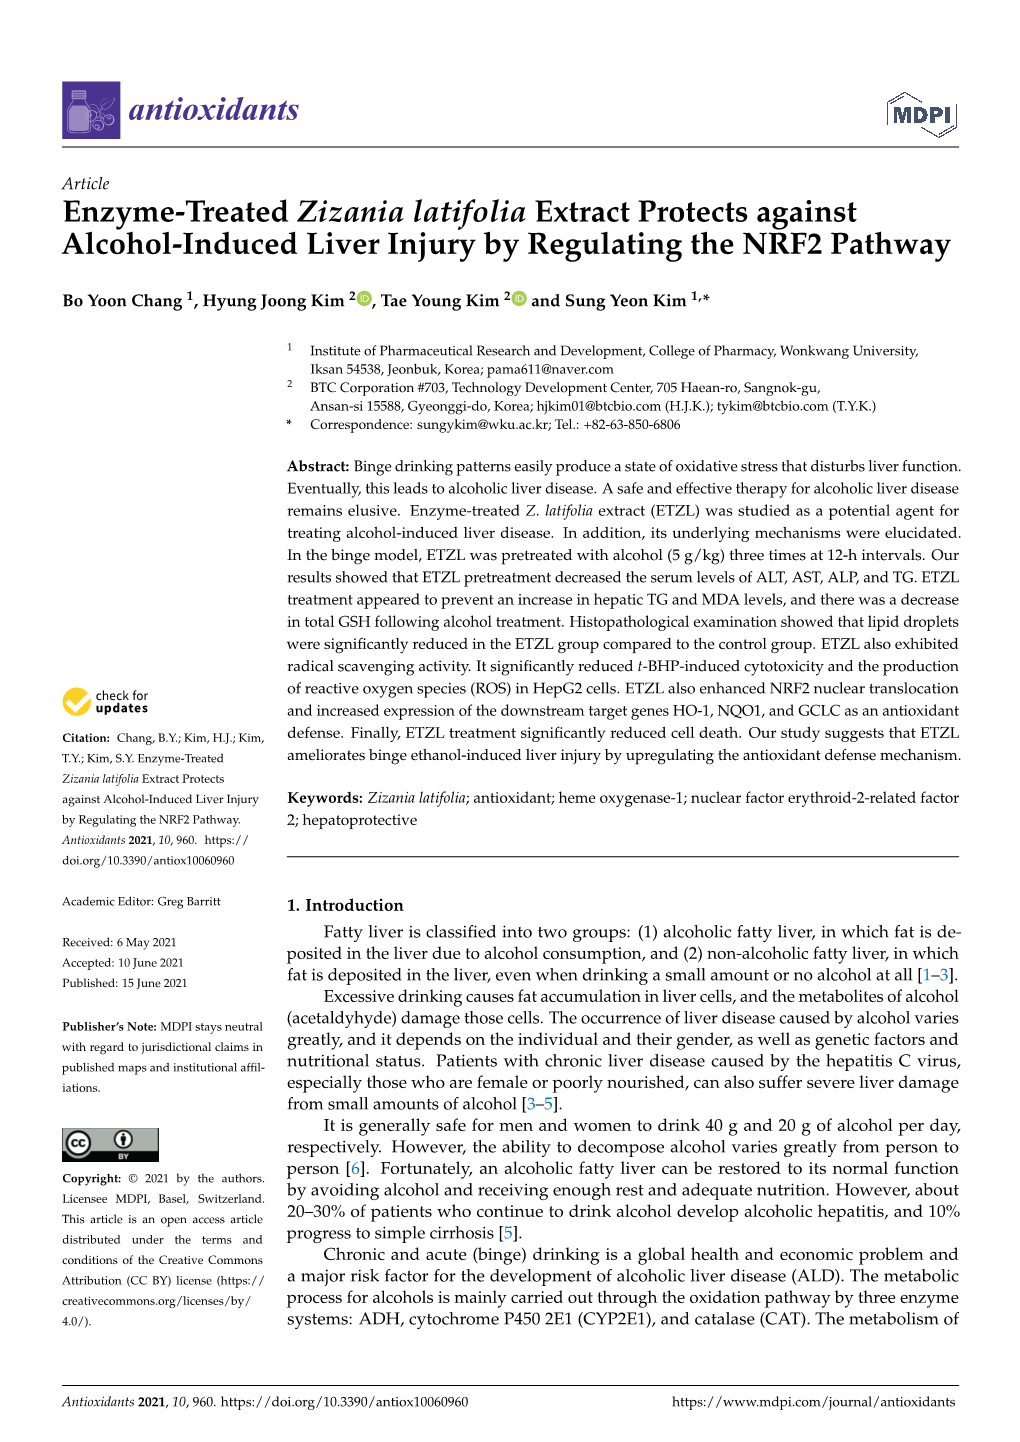 Enzyme-Treated Zizania Latifolia Extract Protects Against Alcohol-Induced Liver Injury by Regulating the NRF2 Pathway